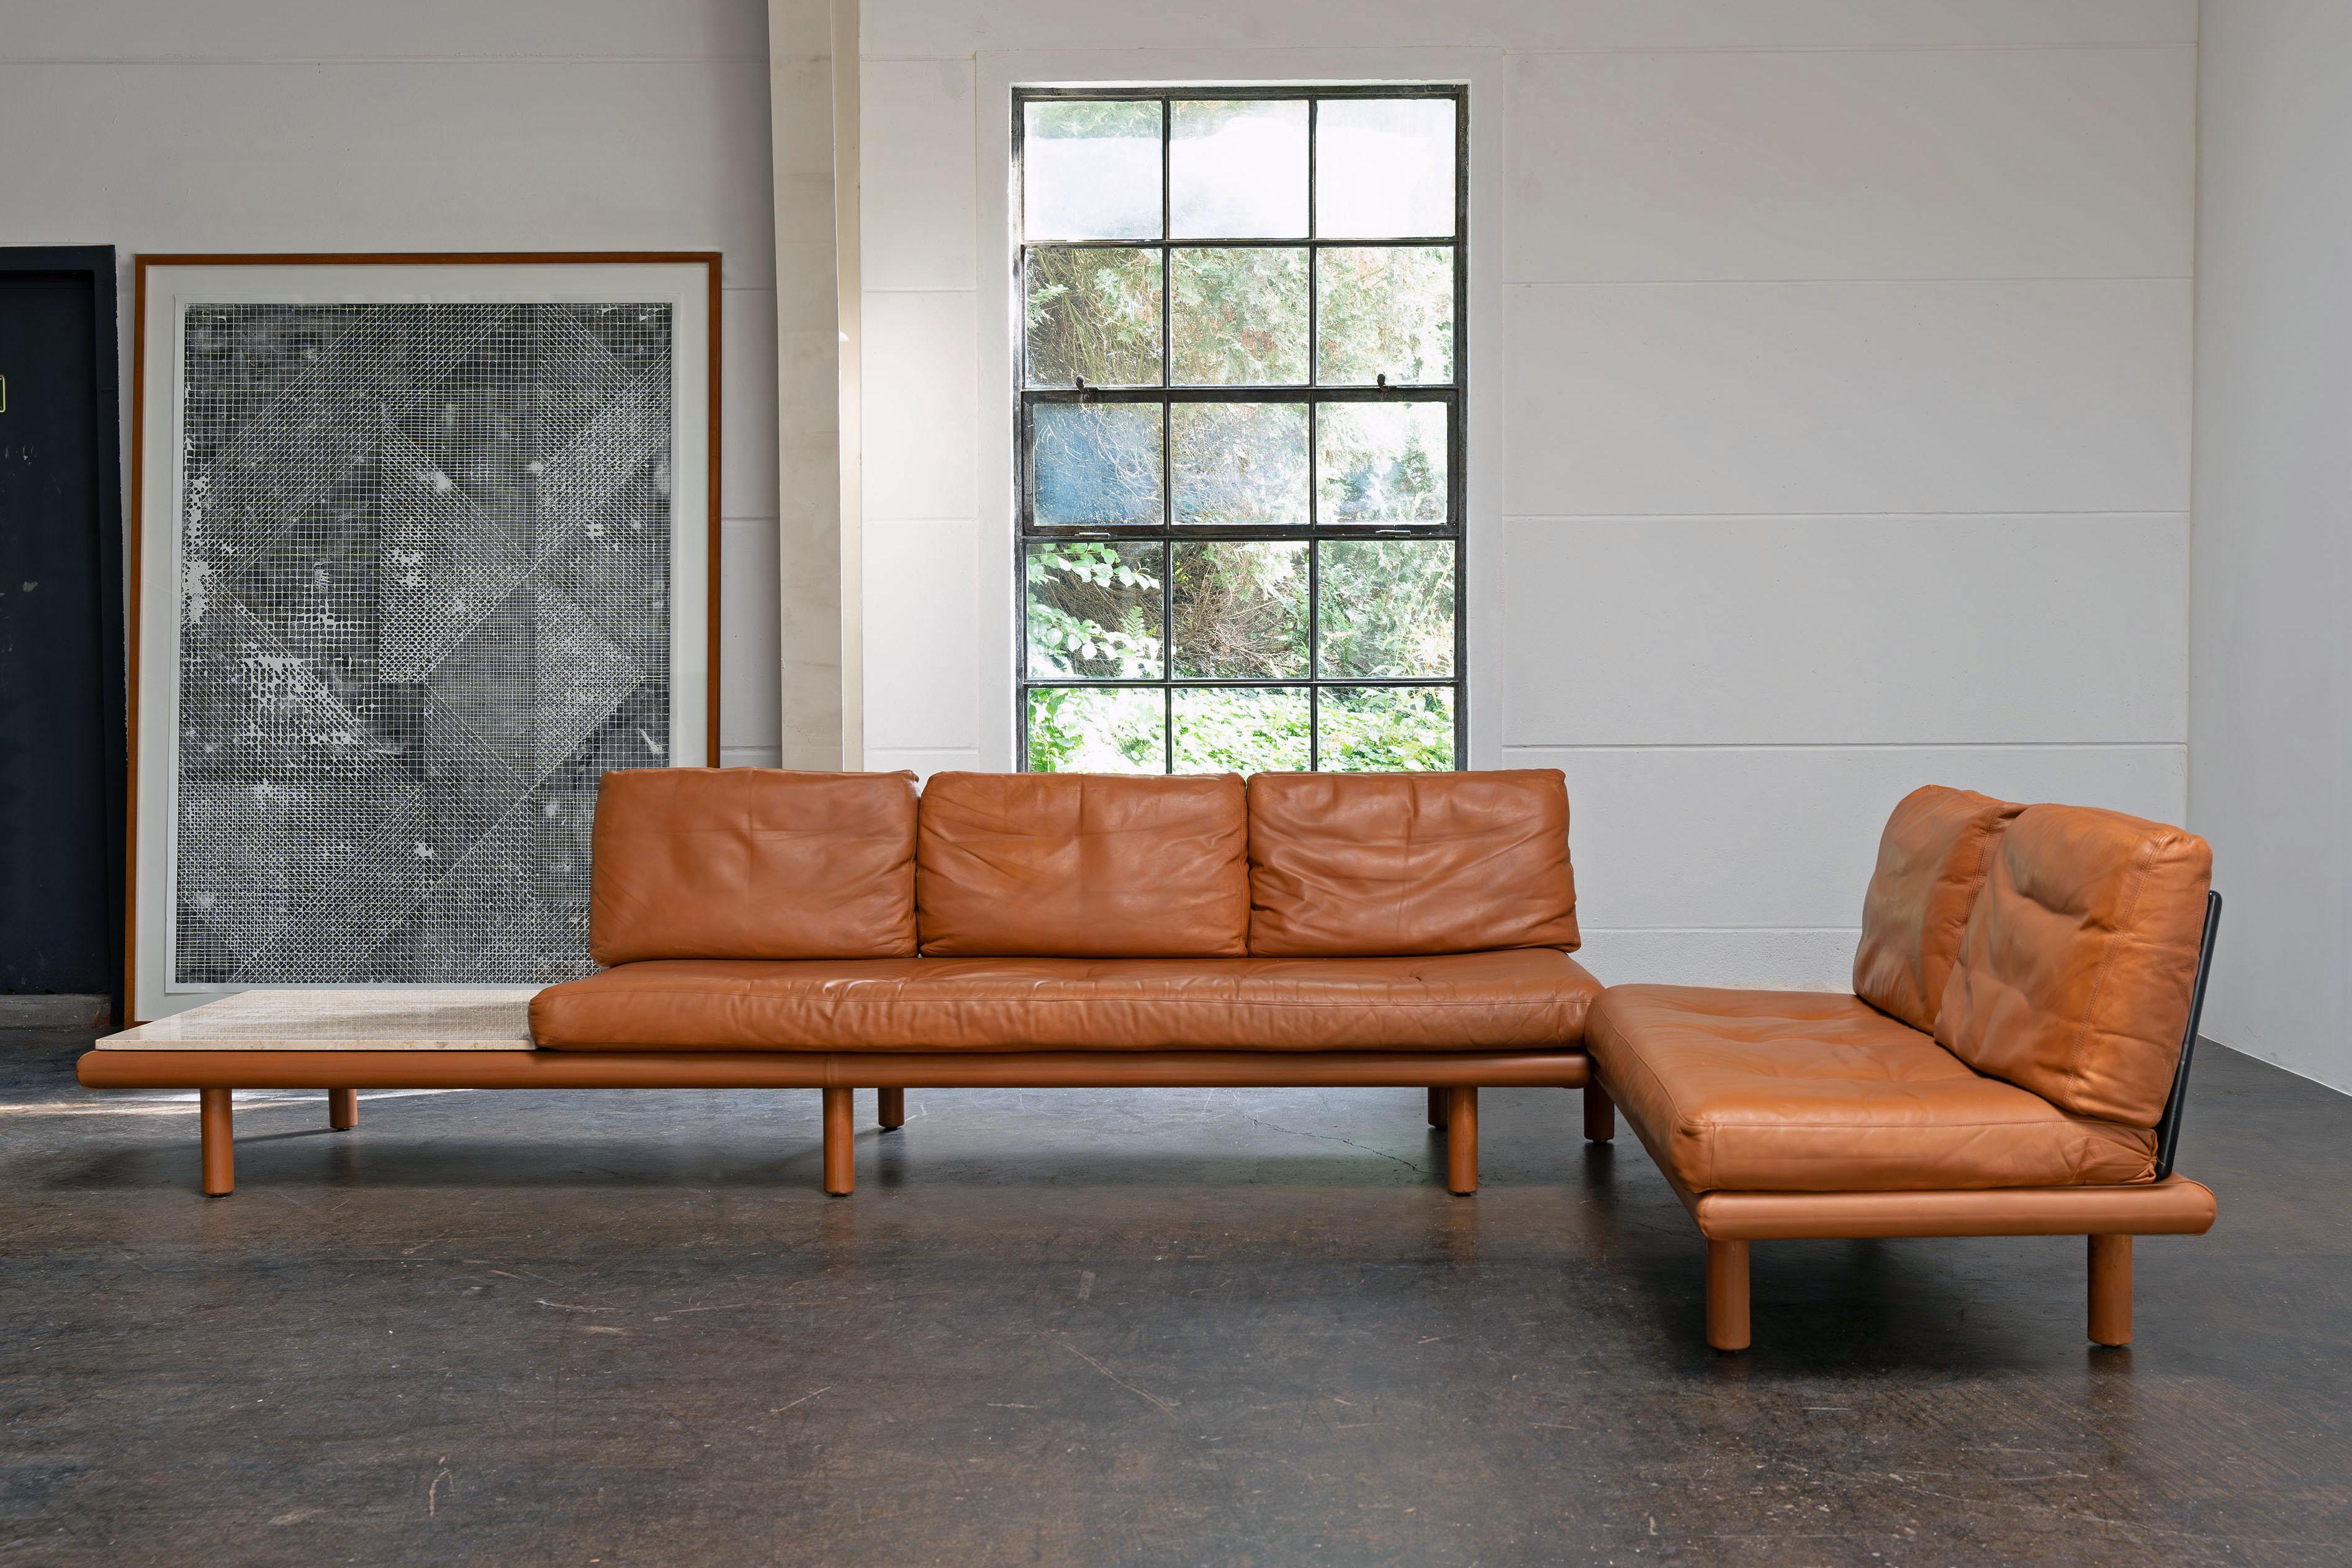 Corner combination consisting of two leather sofas designed by Franz Köttgen and produced by Kill International. The high-quality upholstery is filled with down and covered with glove-soft leather. The sofas each have a travertine table